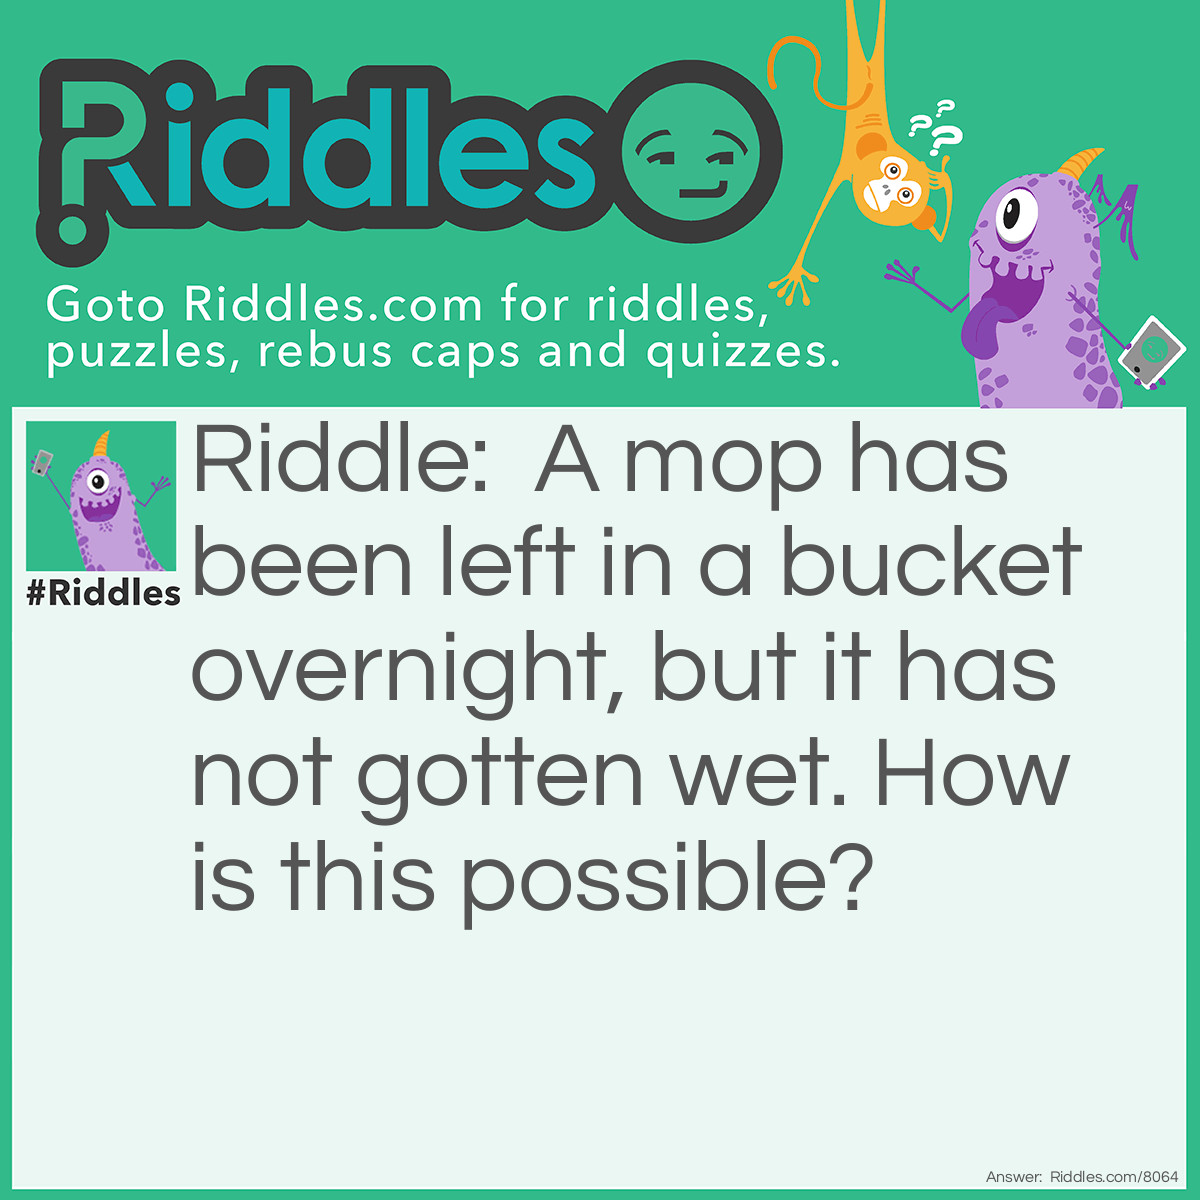 Riddle: A mop has been left in a bucket overnight, but it has not gotten wet. How is this possible? Answer: There was no water in the bucket.